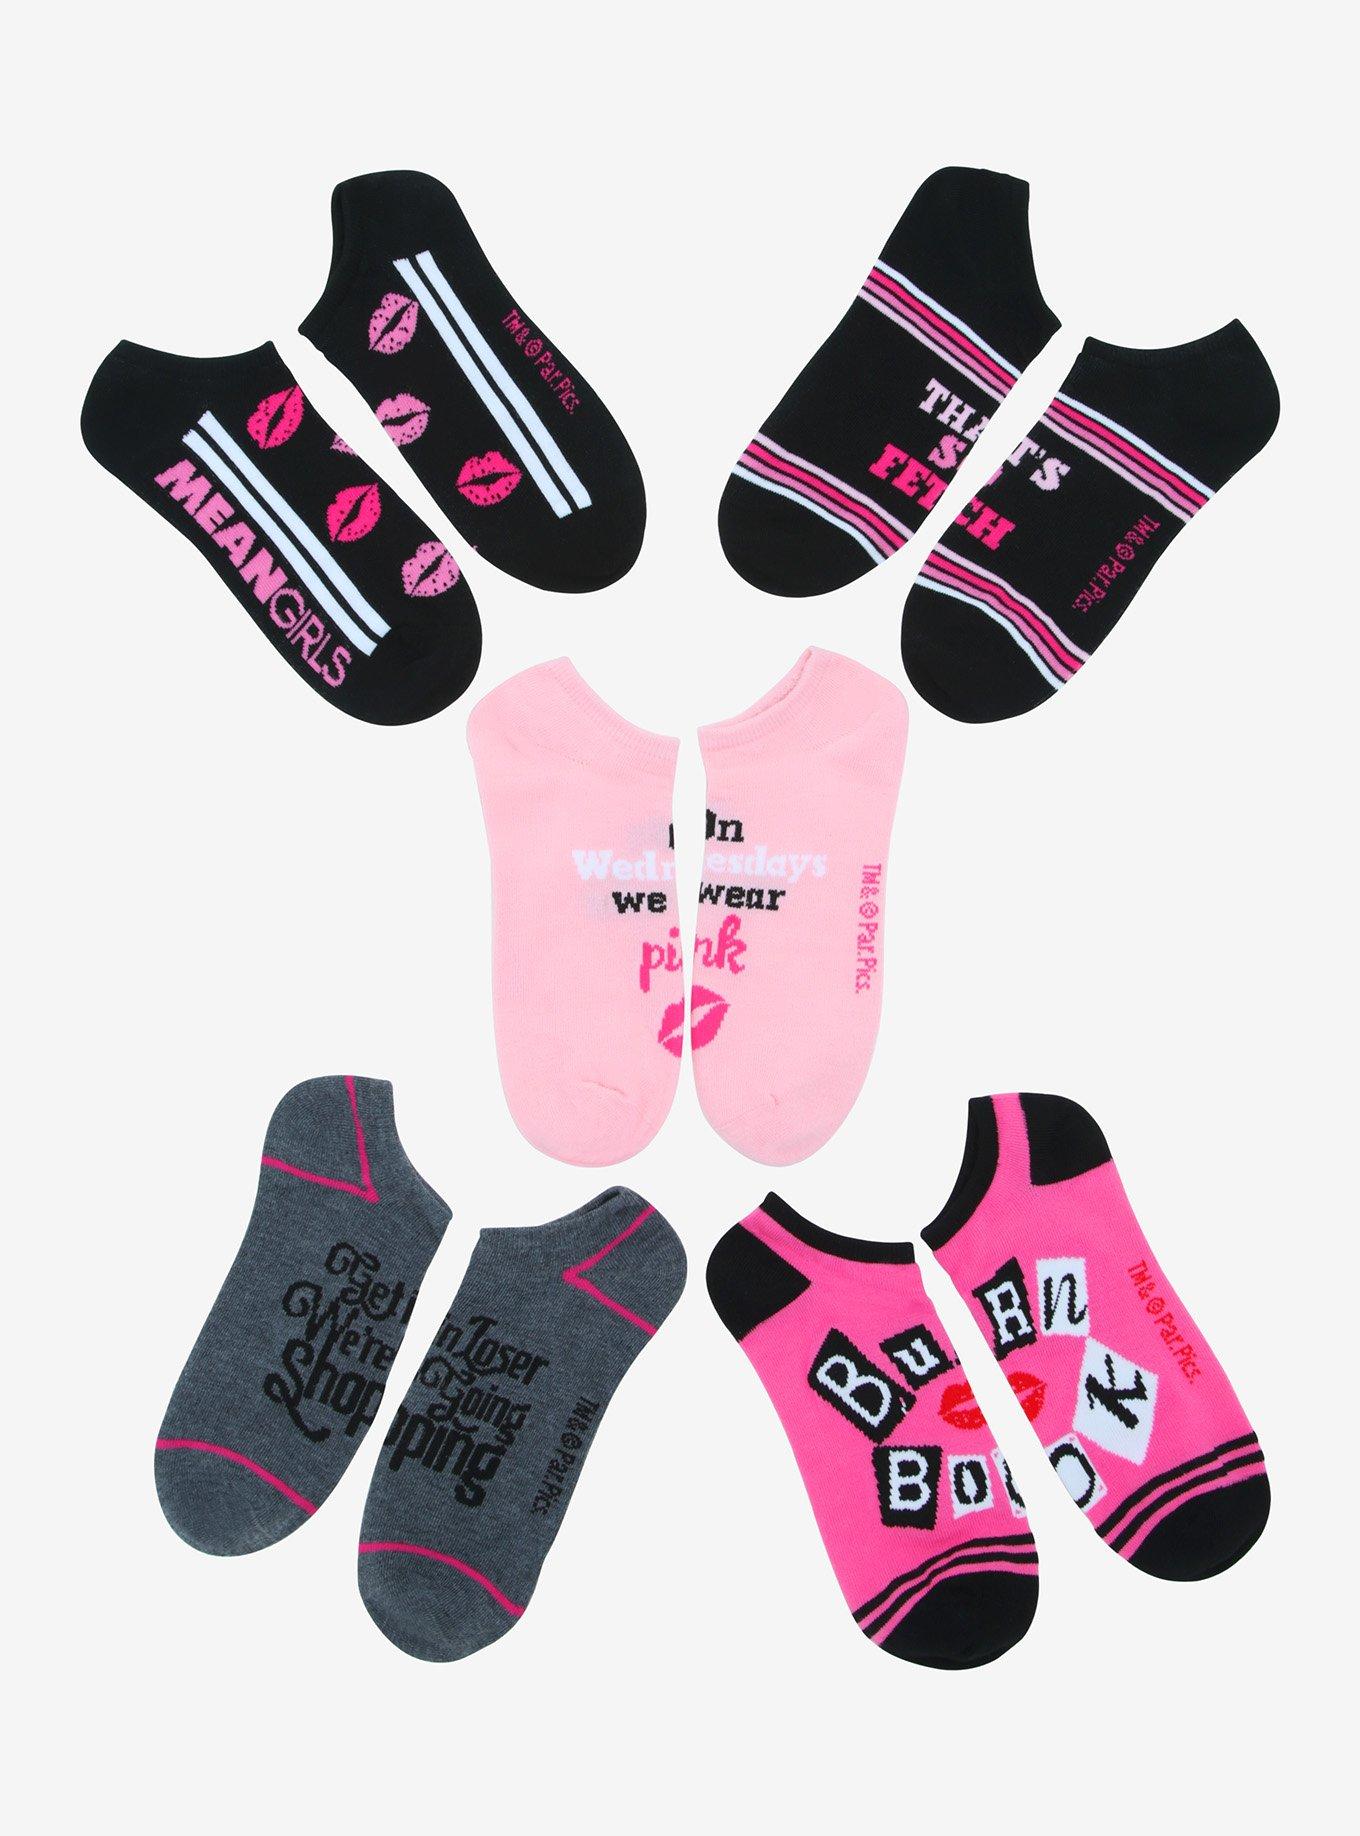 Mean Girls Quotes No-Show Socks 5 Pair